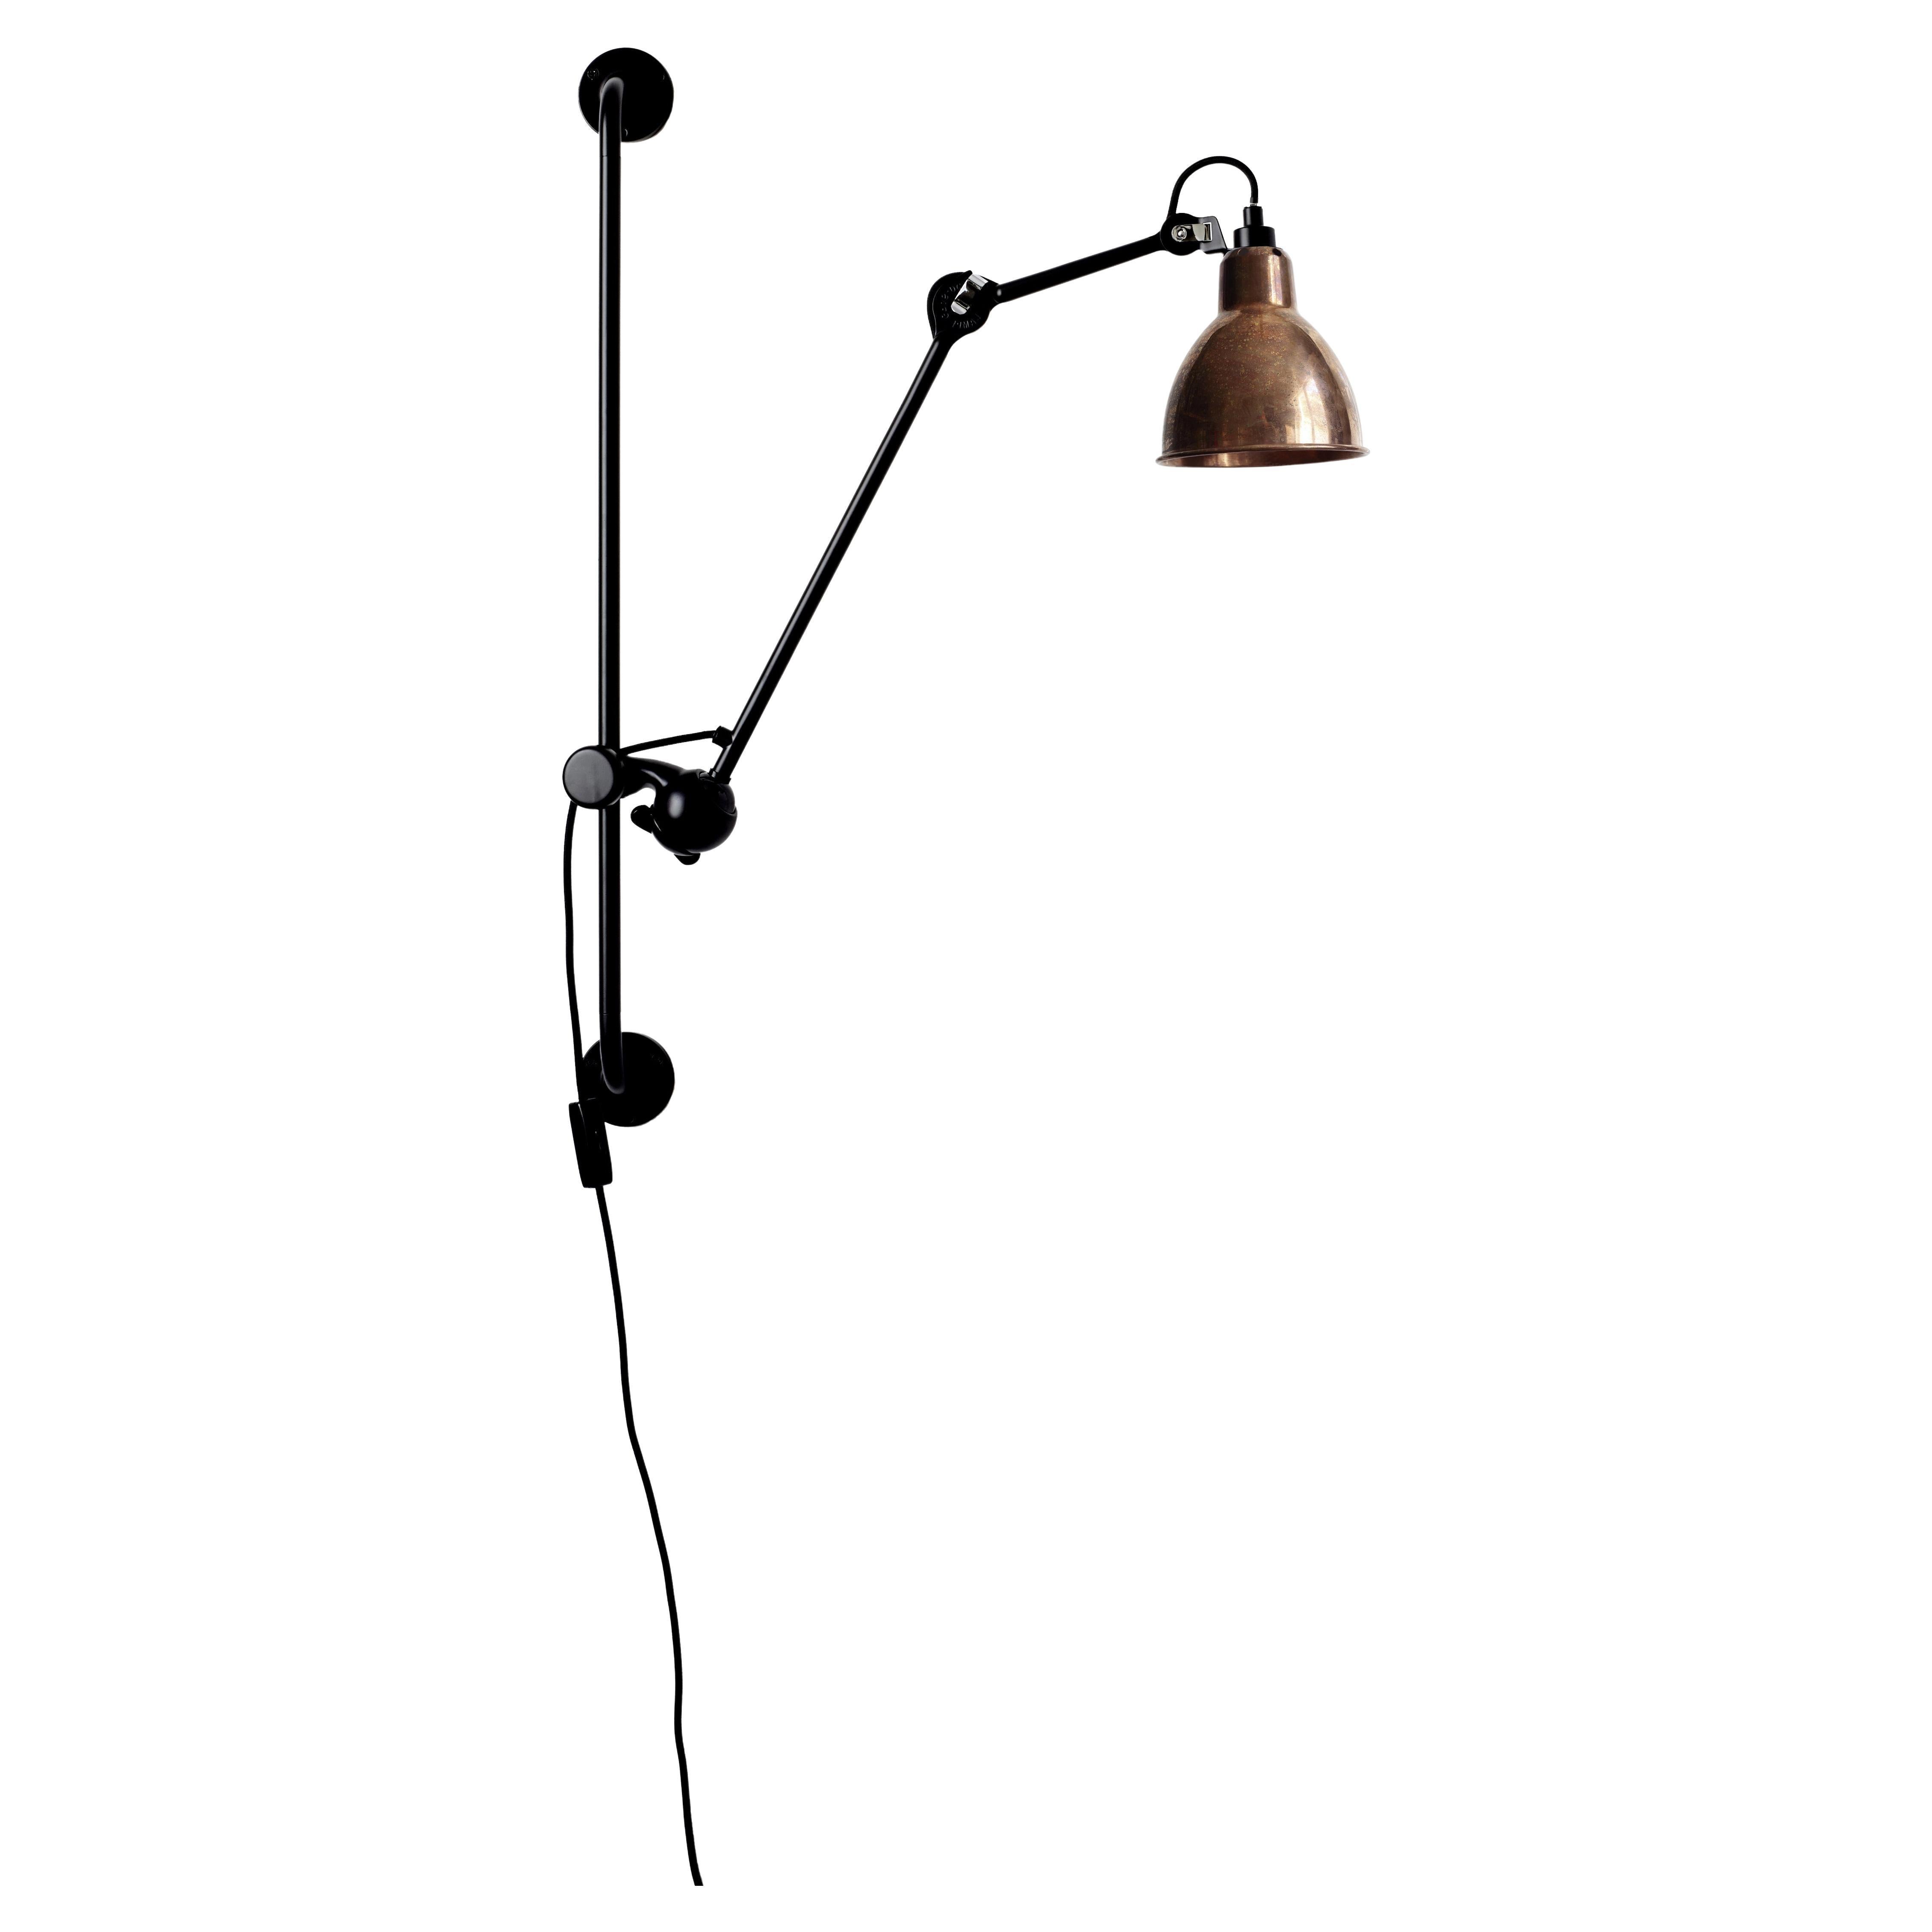 DCW Editions La Lampe Gras N°210 Wall Lamp in Black Arm and Raw Copper Shade